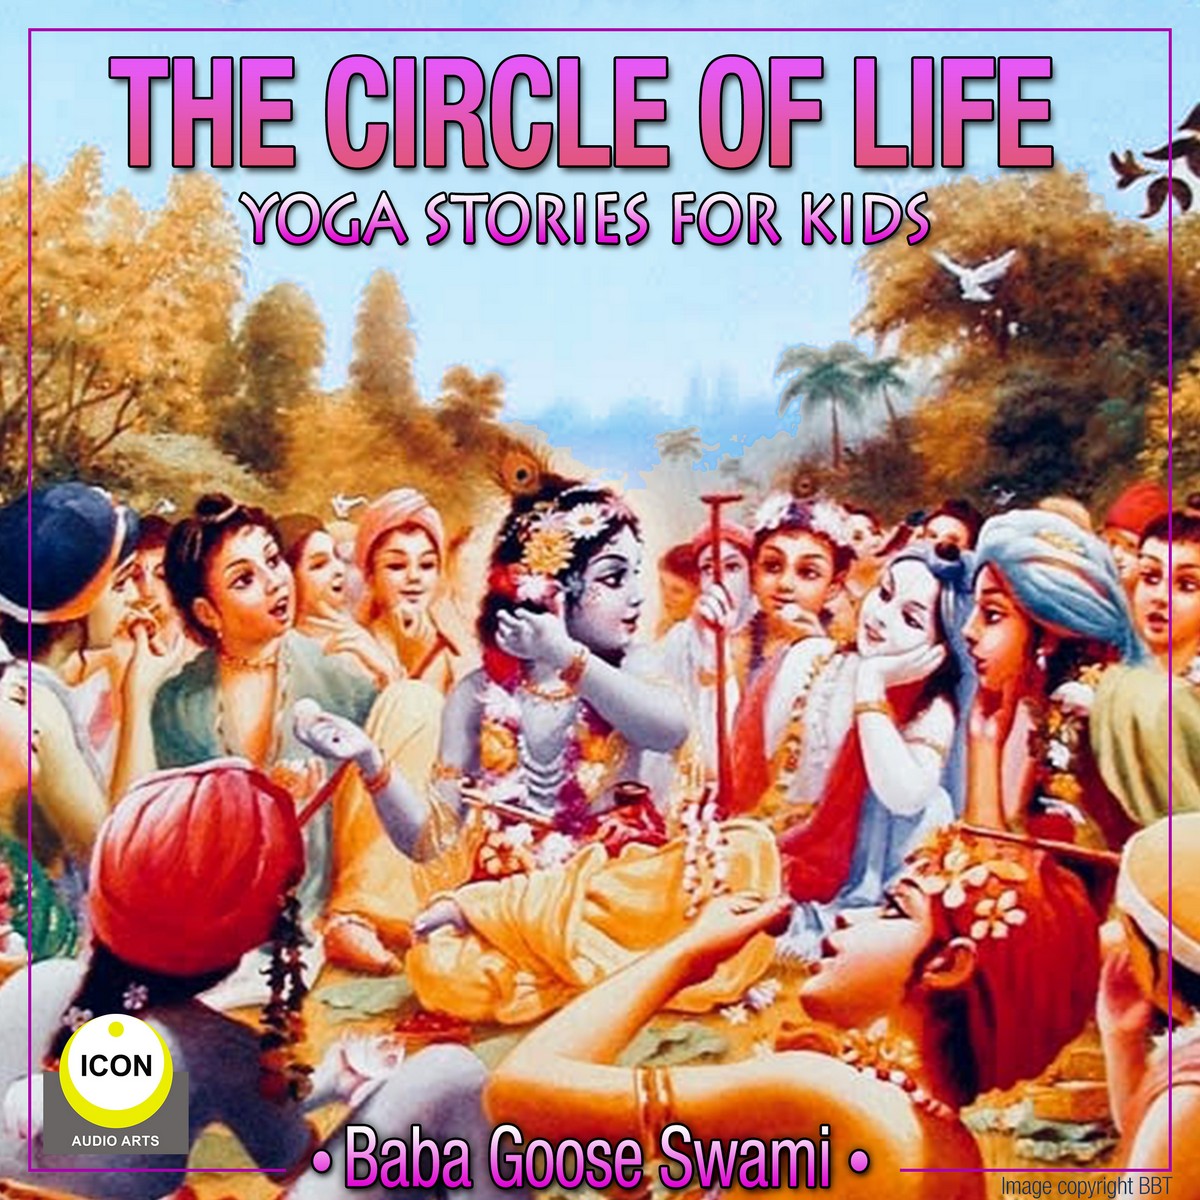 The Circle of Life – Yoga Stories for Kids